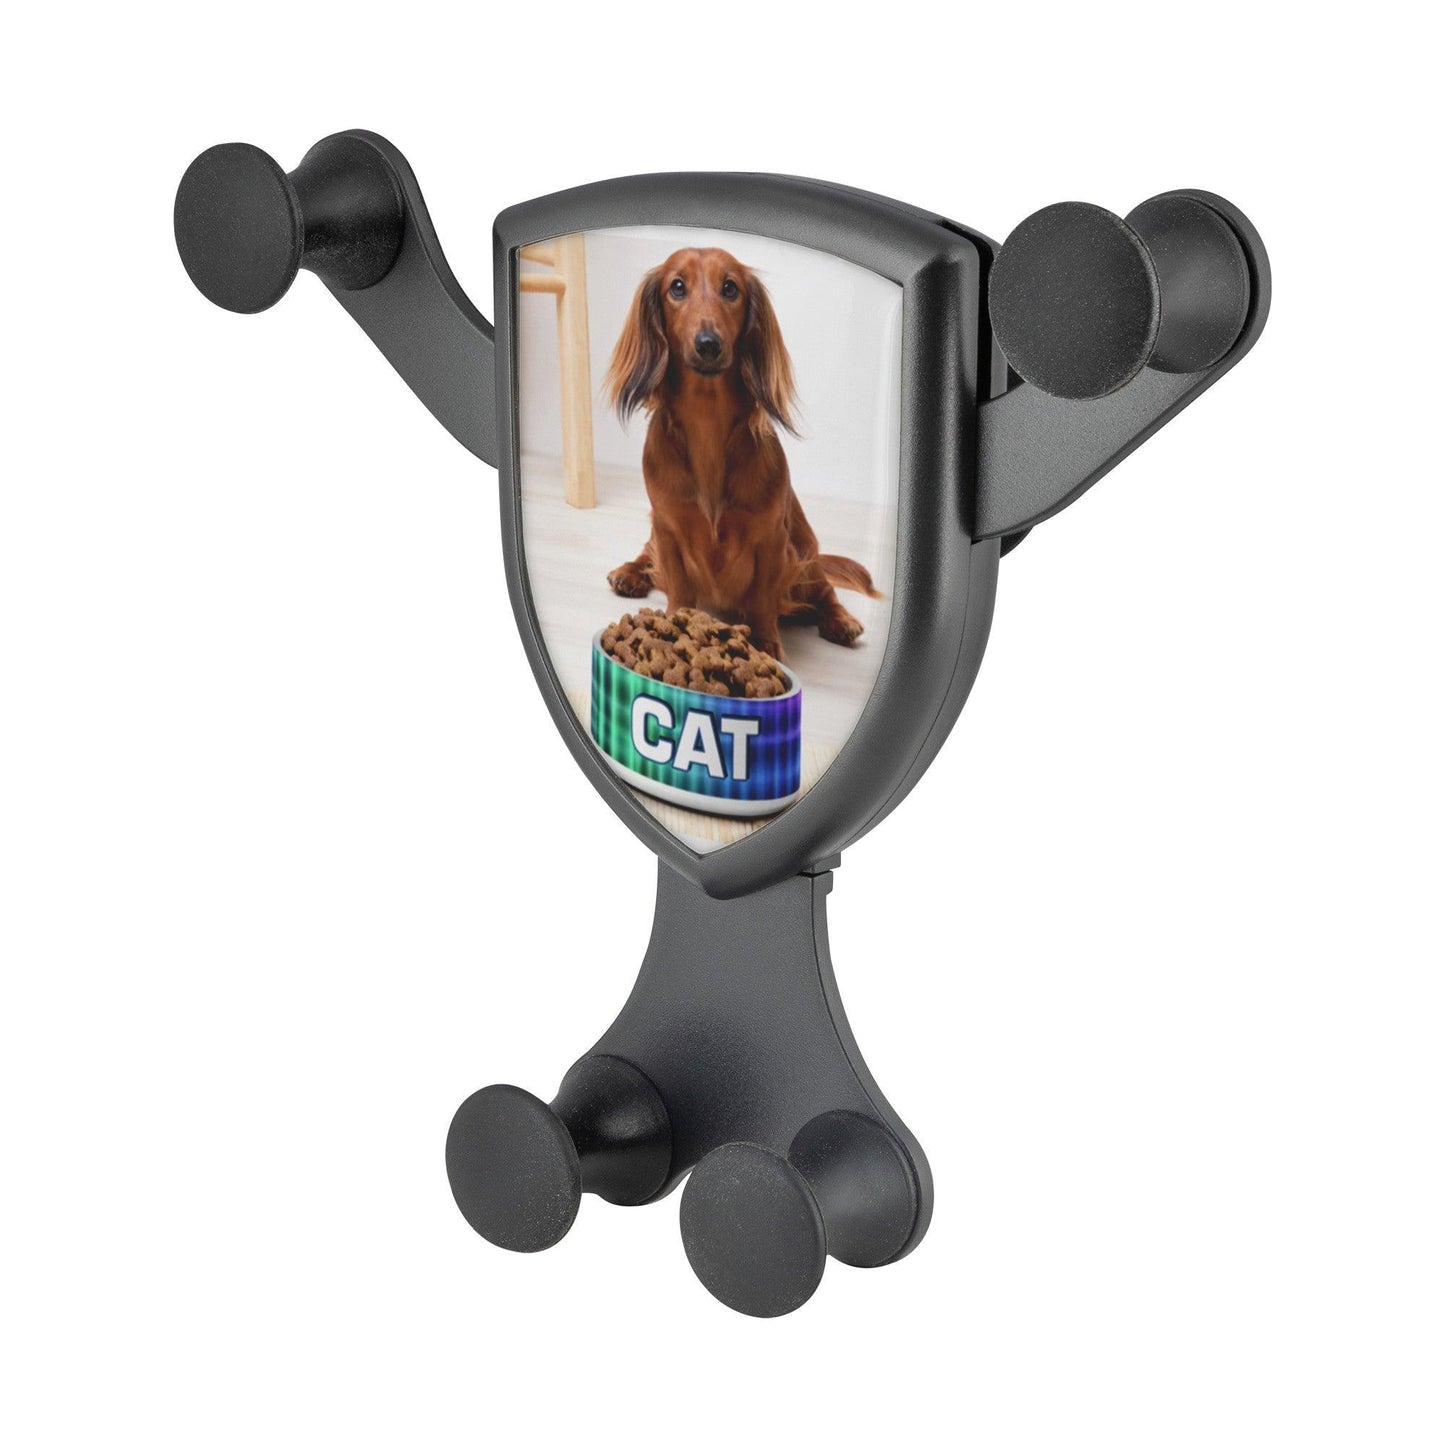 Dog With Cat Bowl Wireless Car Charger - Lizard Vigilante